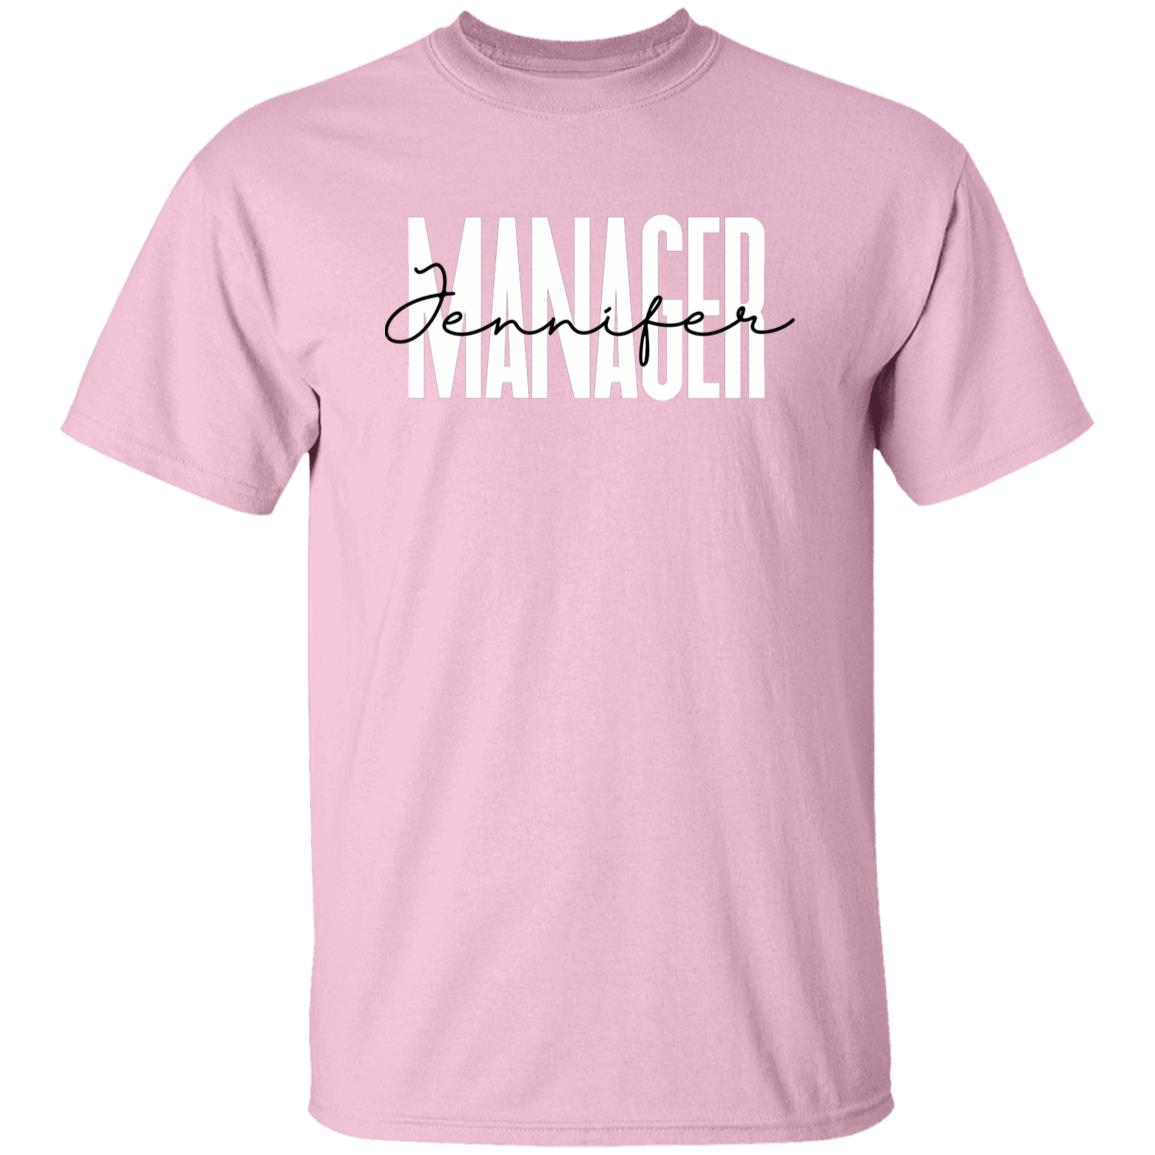 Personalized Manager T-Shirt gift Custom name HR Manager Human Resources Unisex Tee Sand Pink Blue-Family-Gift-Planet